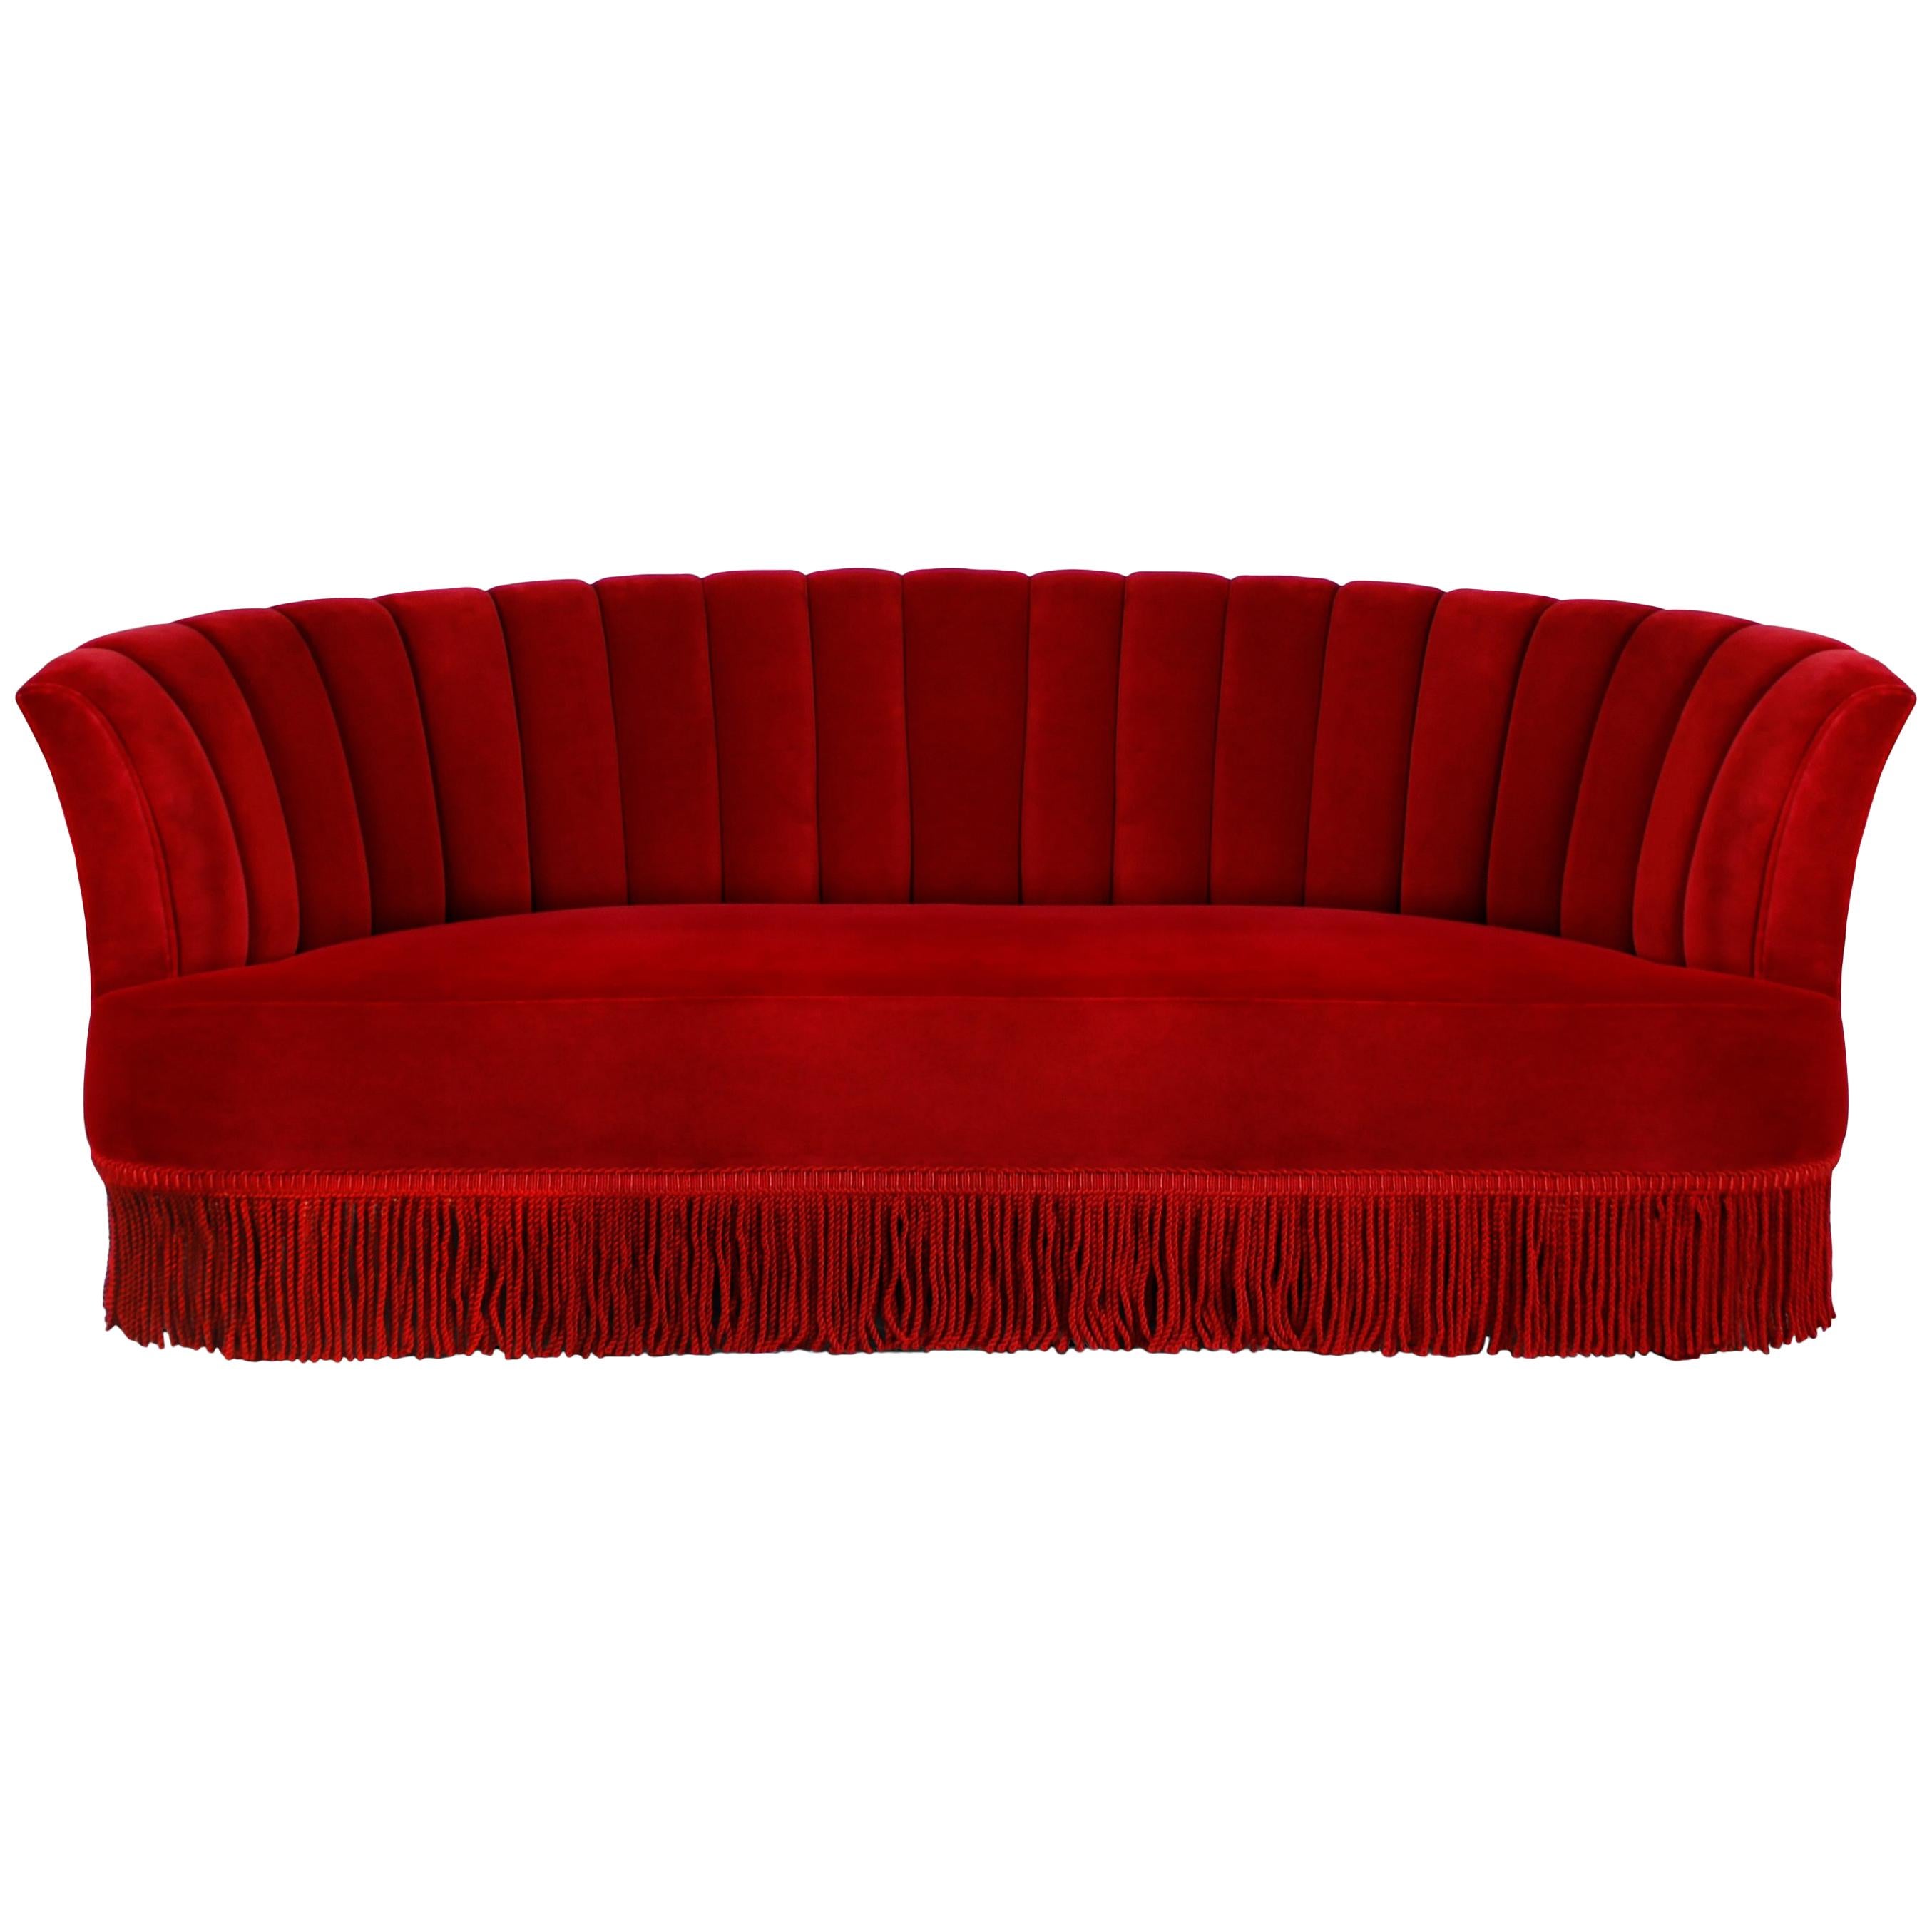 Inspired by wild, passionate nights of the Spanish dance, the Sevilliana sofa design embodies the graceful curves and attire of Sevillana dancing girls. Become entranced in the movement of modern lines drawing your eye down to the flirtatious fringe